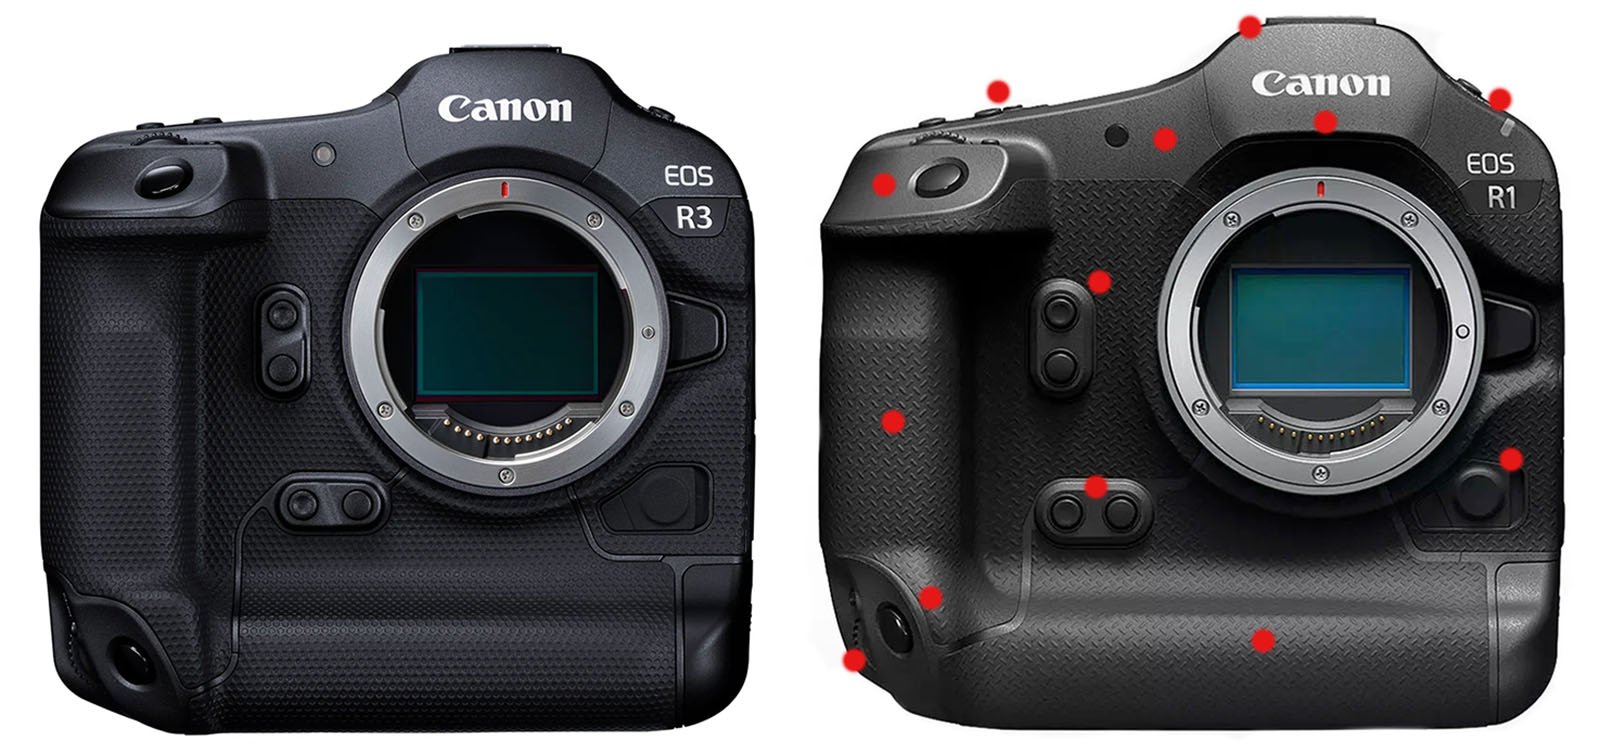 A side-by-side comparison of two Canon camera bodies, the EOS R3 on the left, and the EOS R1 on the right. Both cameras have a similar design, but with noticeable differences in button layout and ergonomics. The sensors are visible, and the Canon logos are prominent.